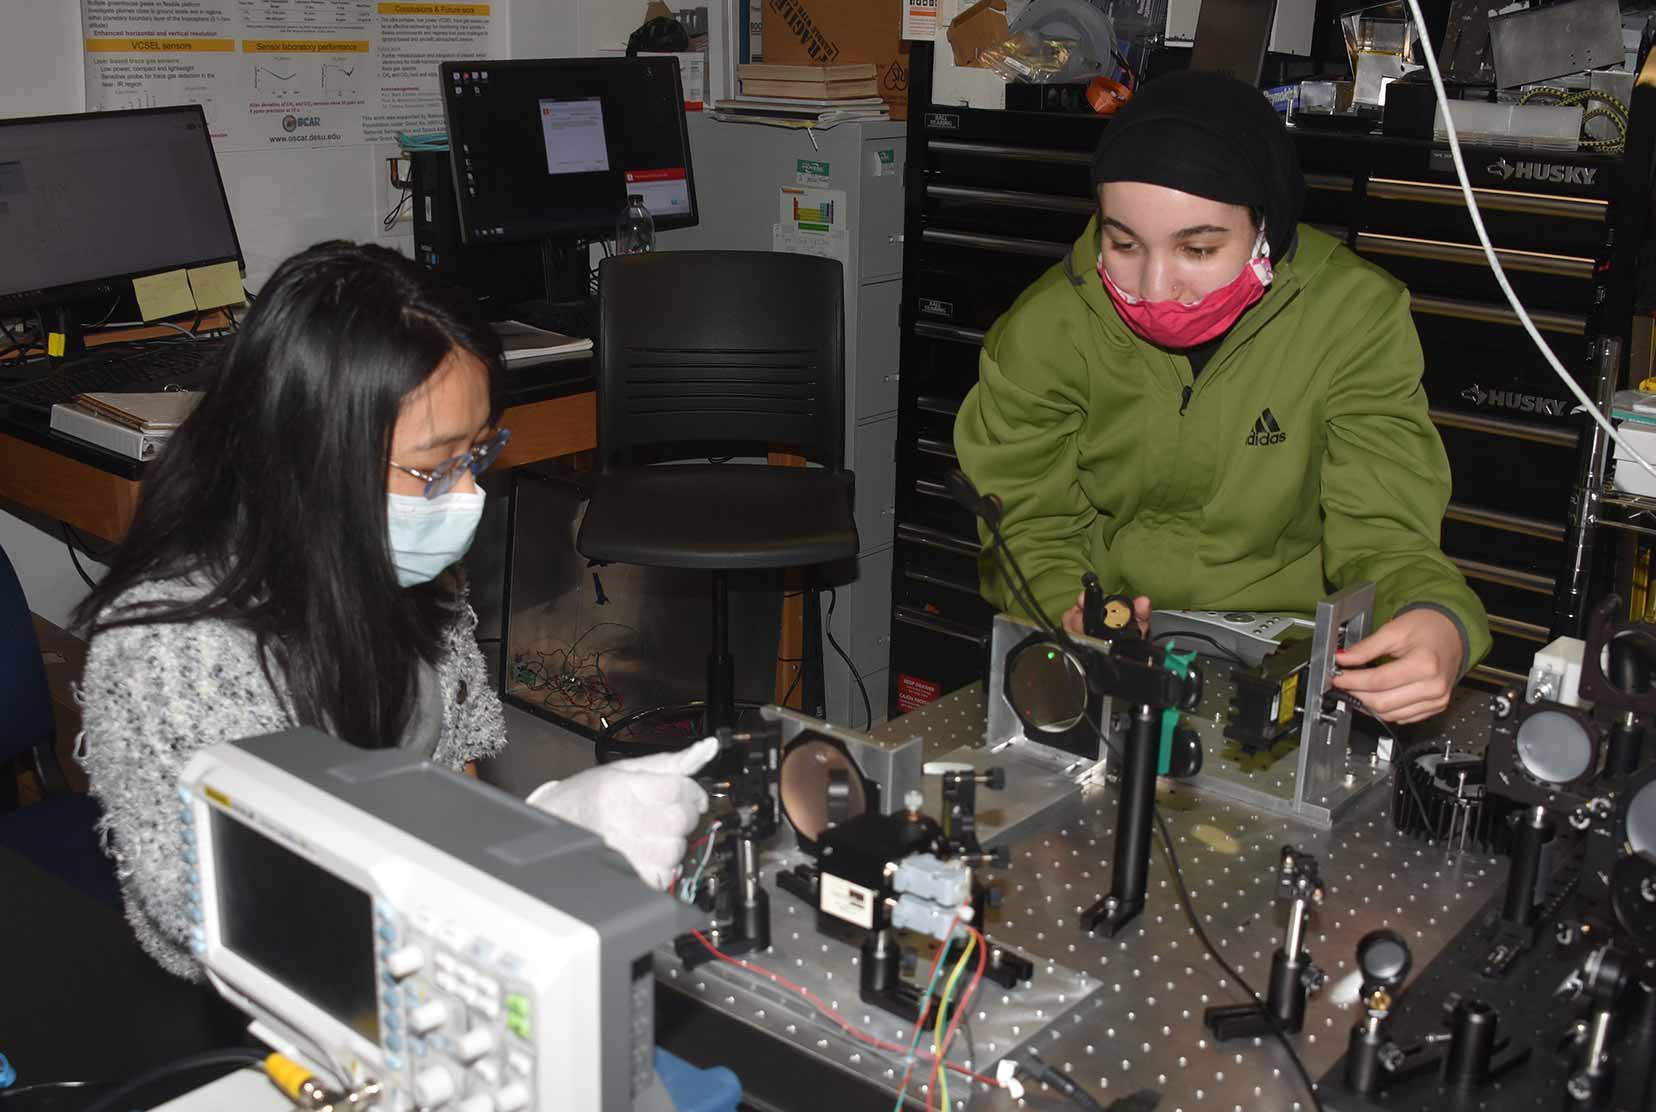 (L-r) Yue An, an optics graduate student from China, and Zayna Juracka, an engineering undergraduate and recent Early College High School graduate, are building a sensor that will measure air quality as part of an Air Quality Mapping summer program.